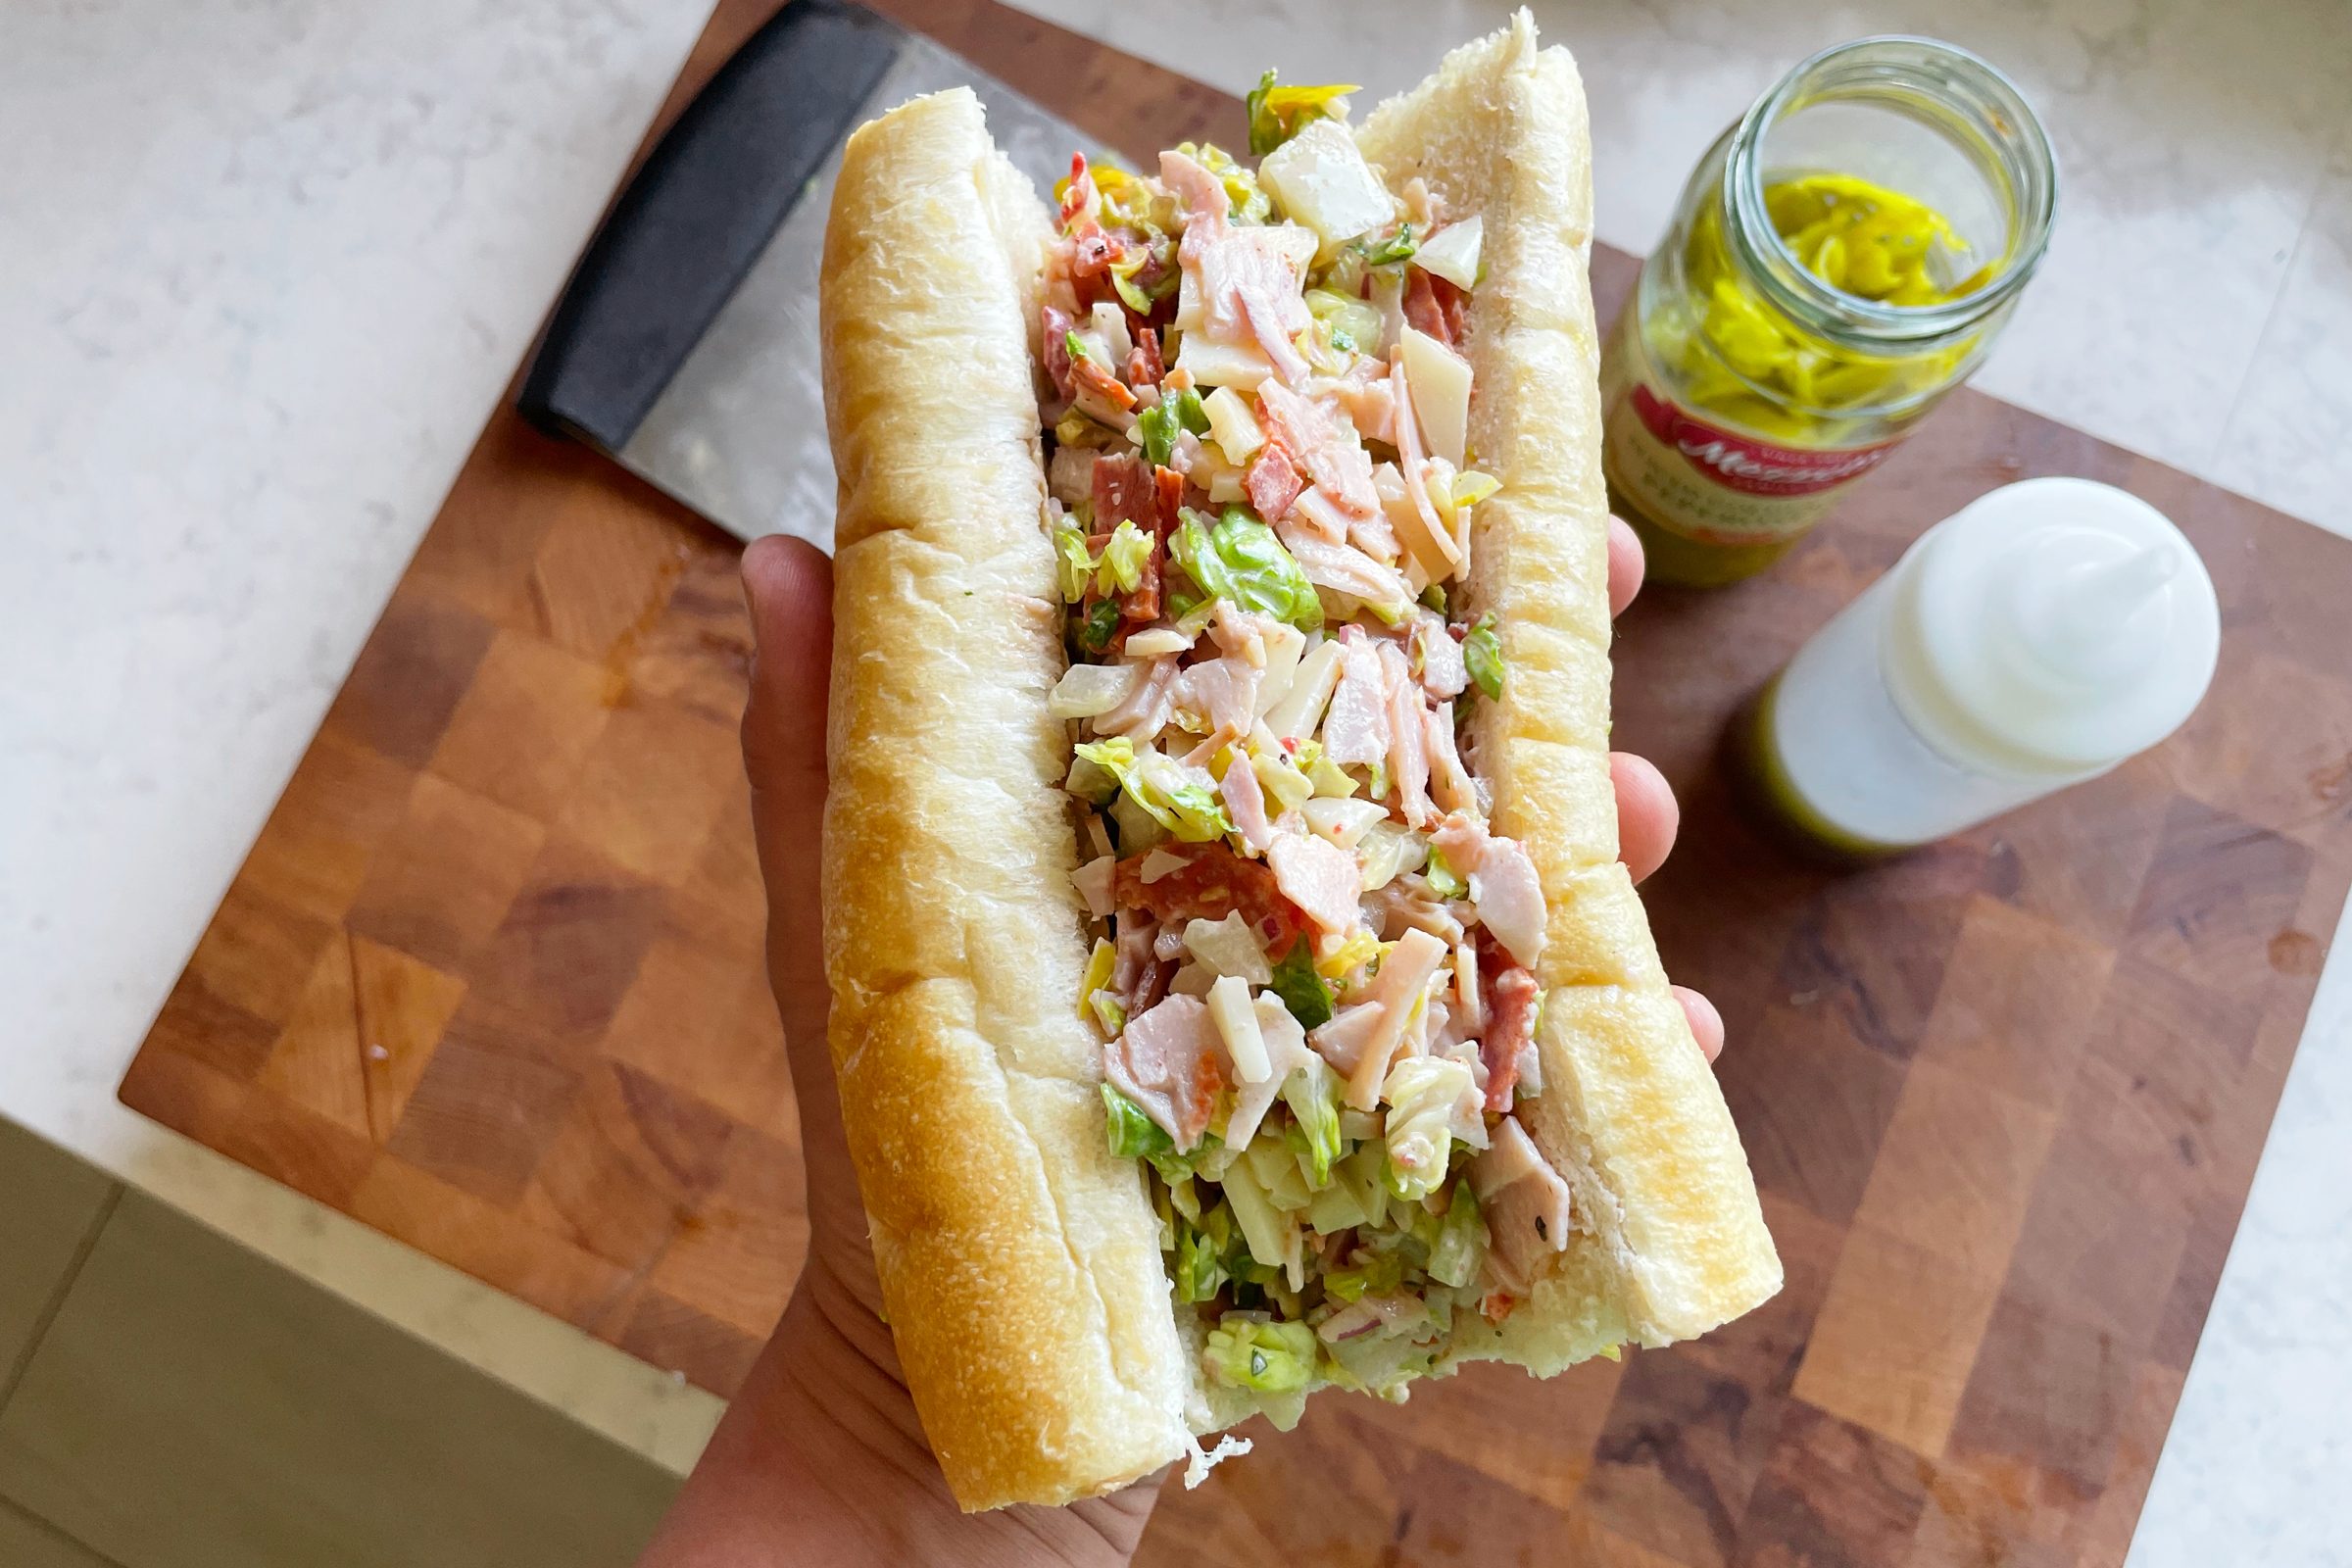 Let's build a homemade Italian submarine sandwich together